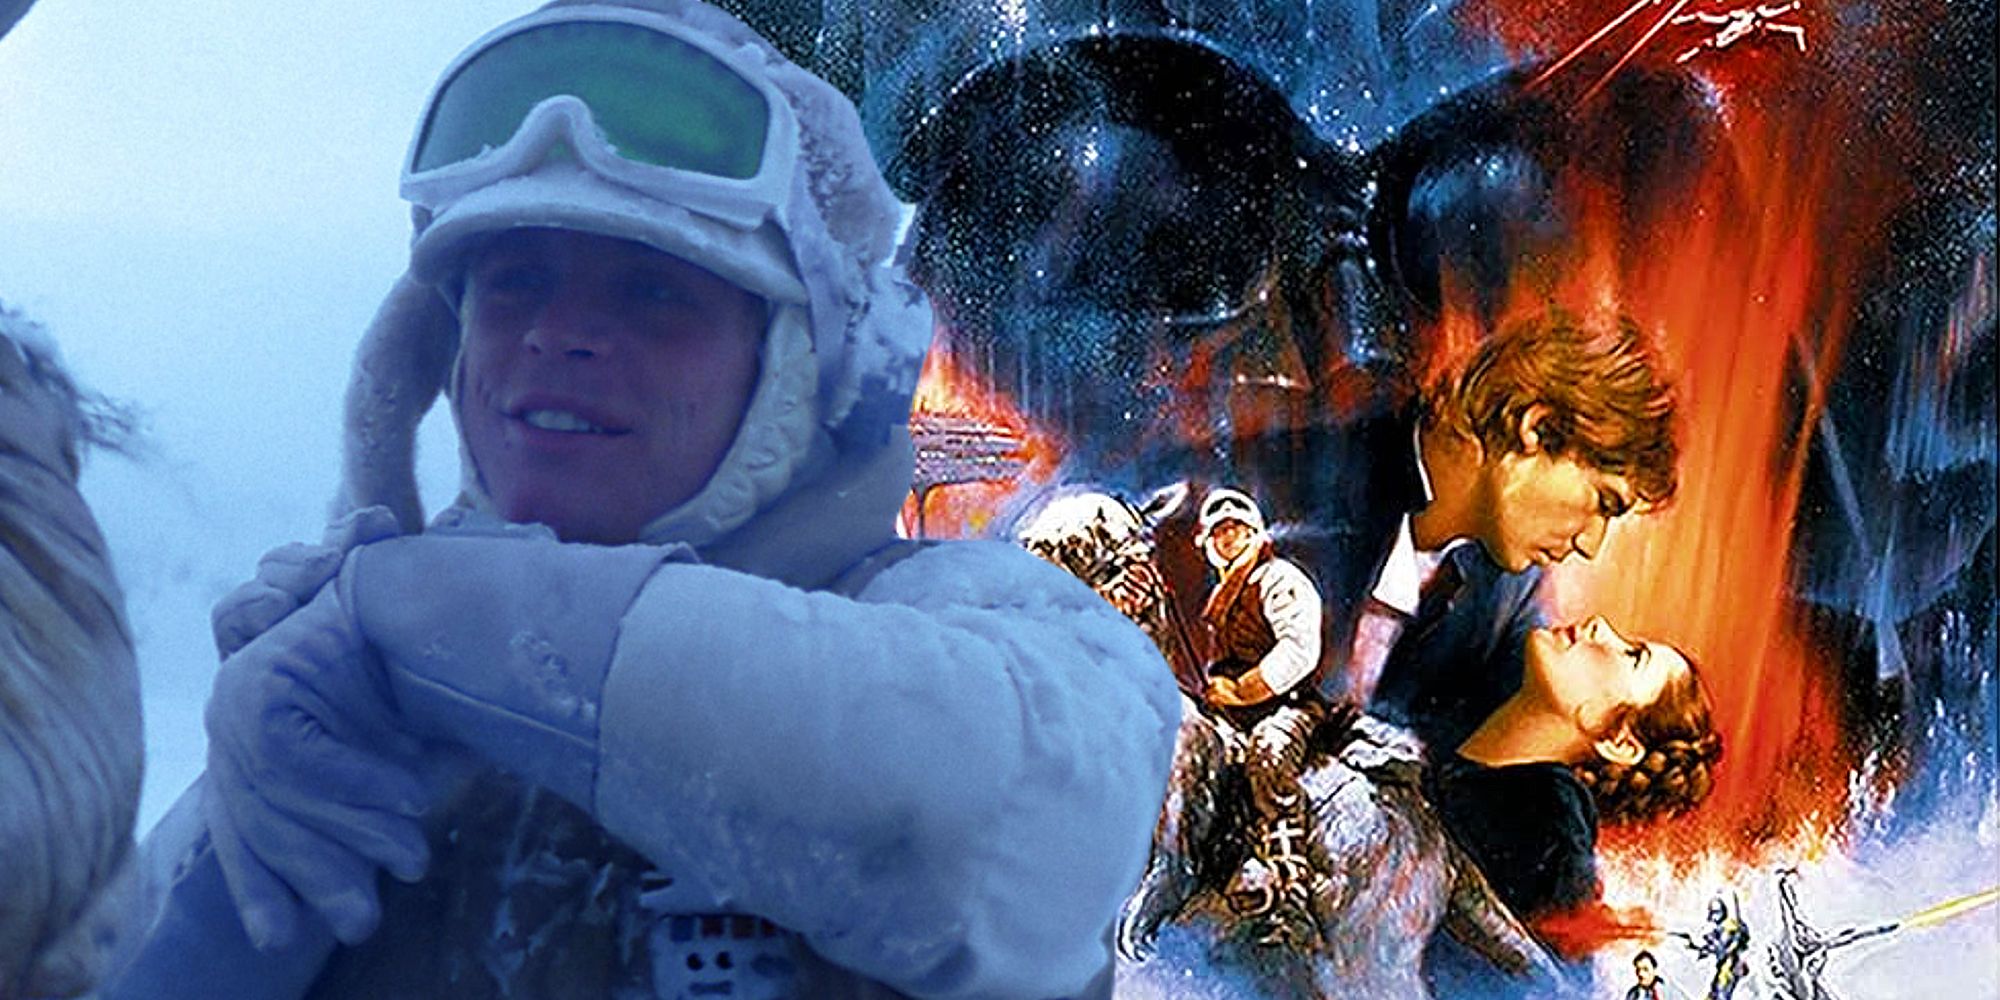 The poster for The Empire Strikes Back next to Luke Skywalker in his Hoth costume